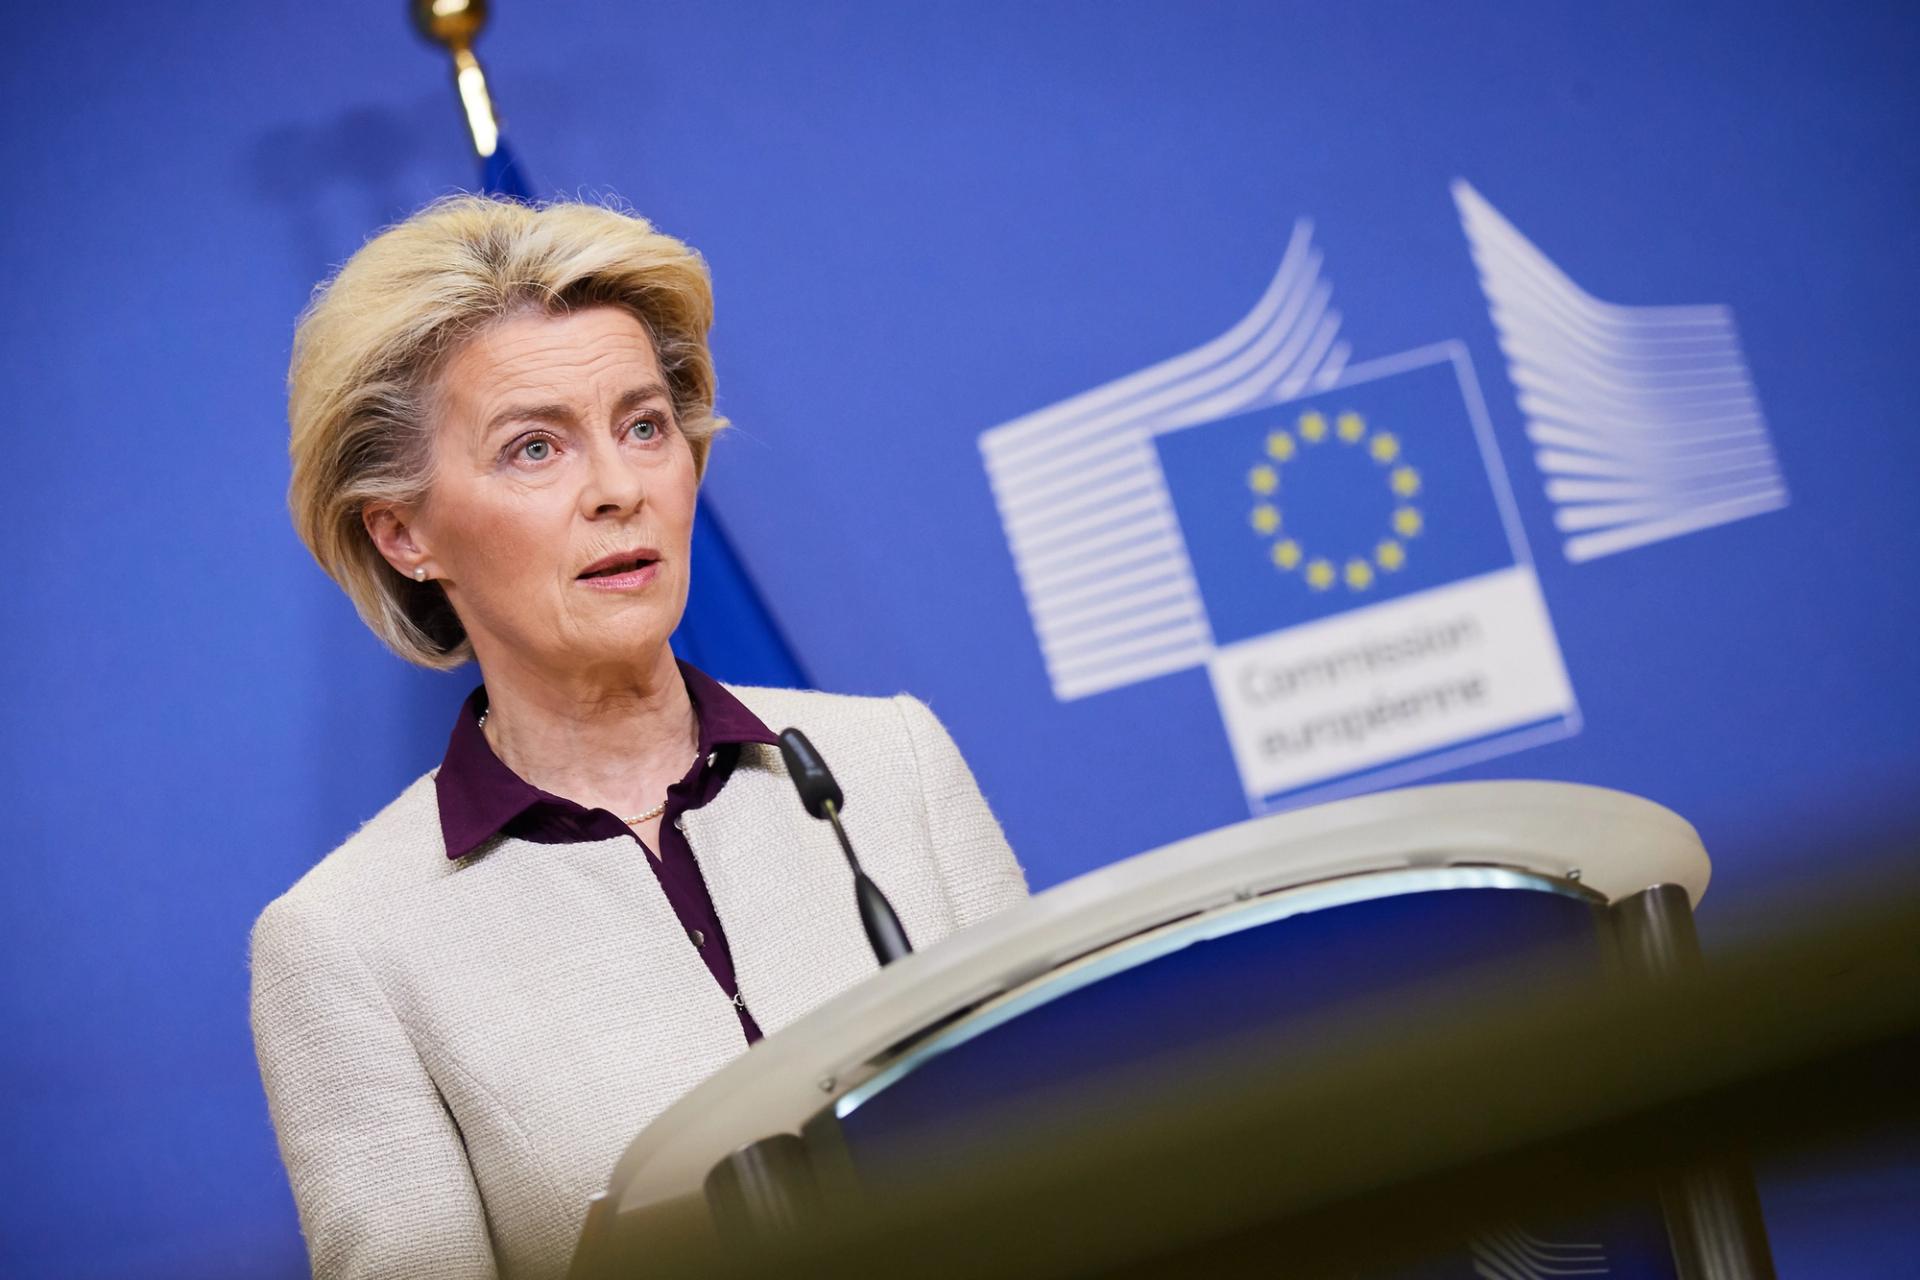 President of the European Commission Ursula von der Leyen recently identified Russian disinformation as one of the biggest threats facing Europe 